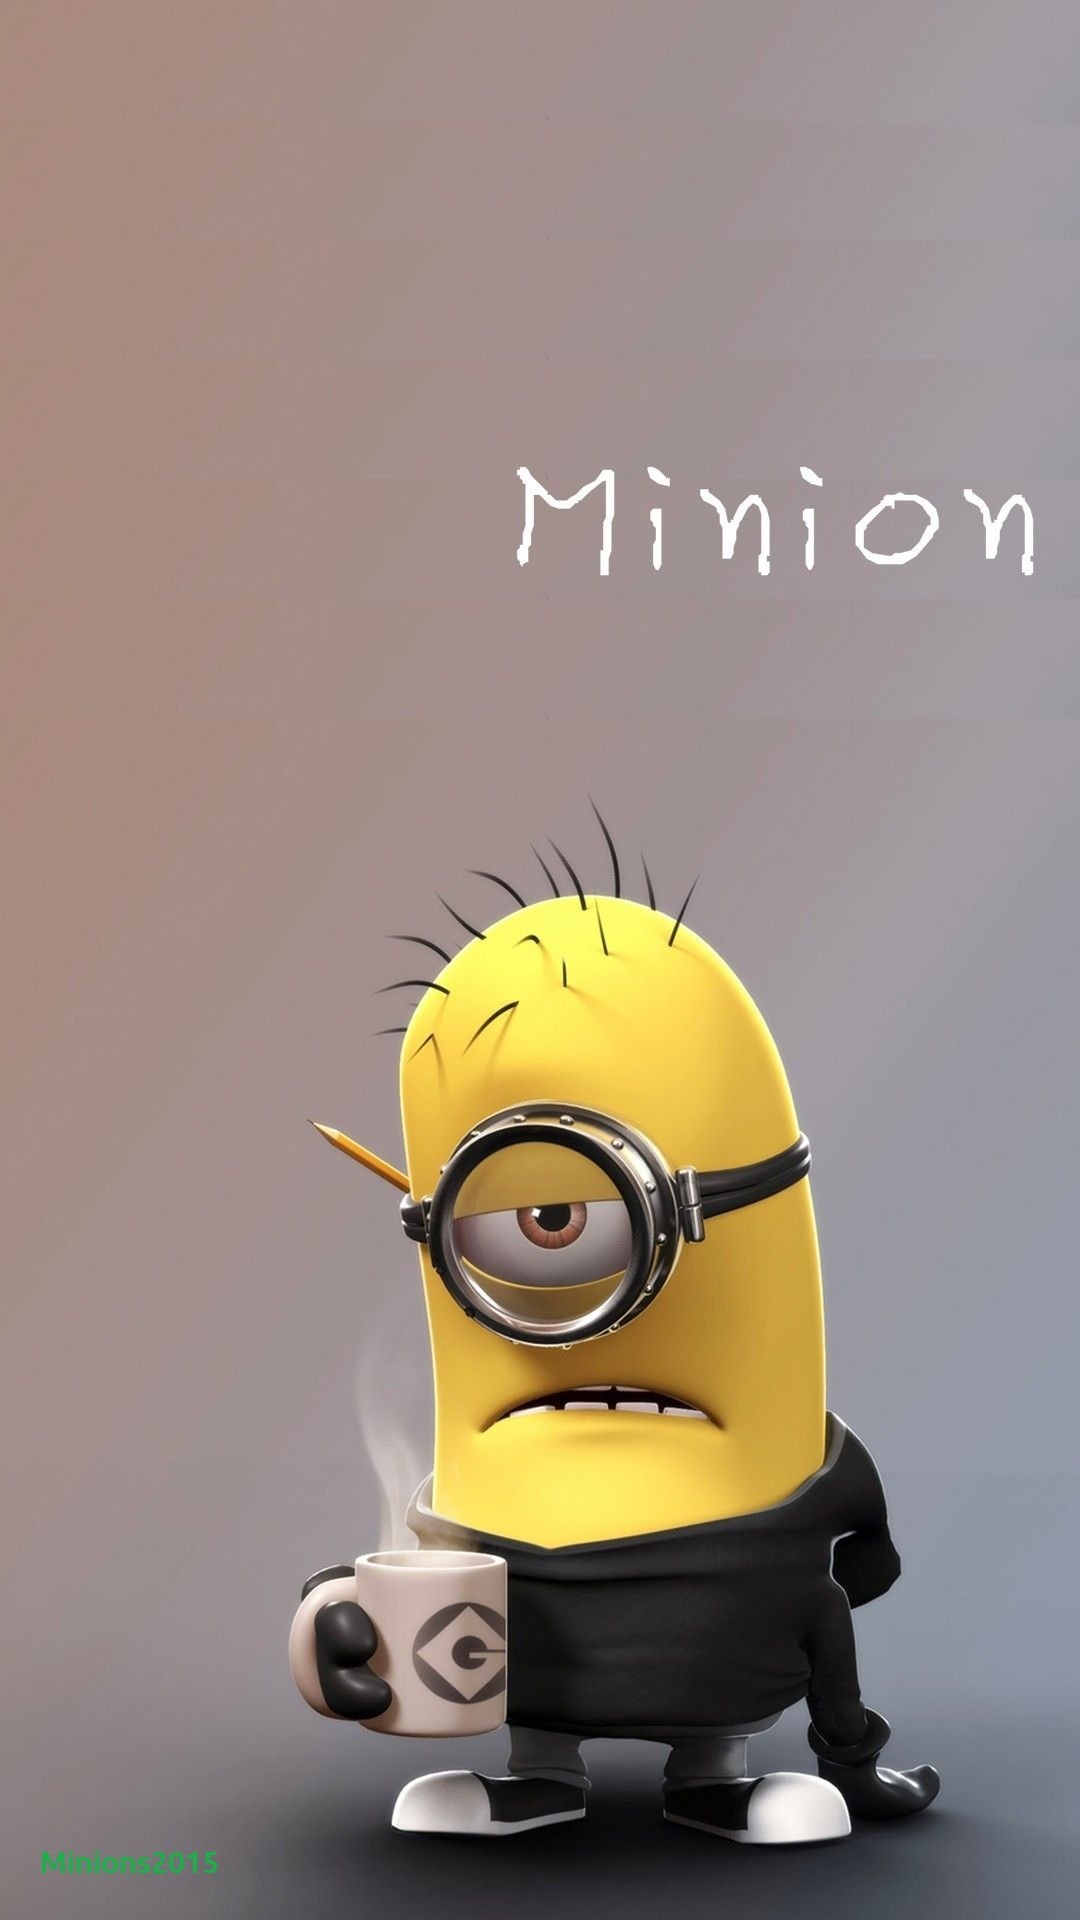 1080x1920 1920x1140 Minions wallpapers for desktop